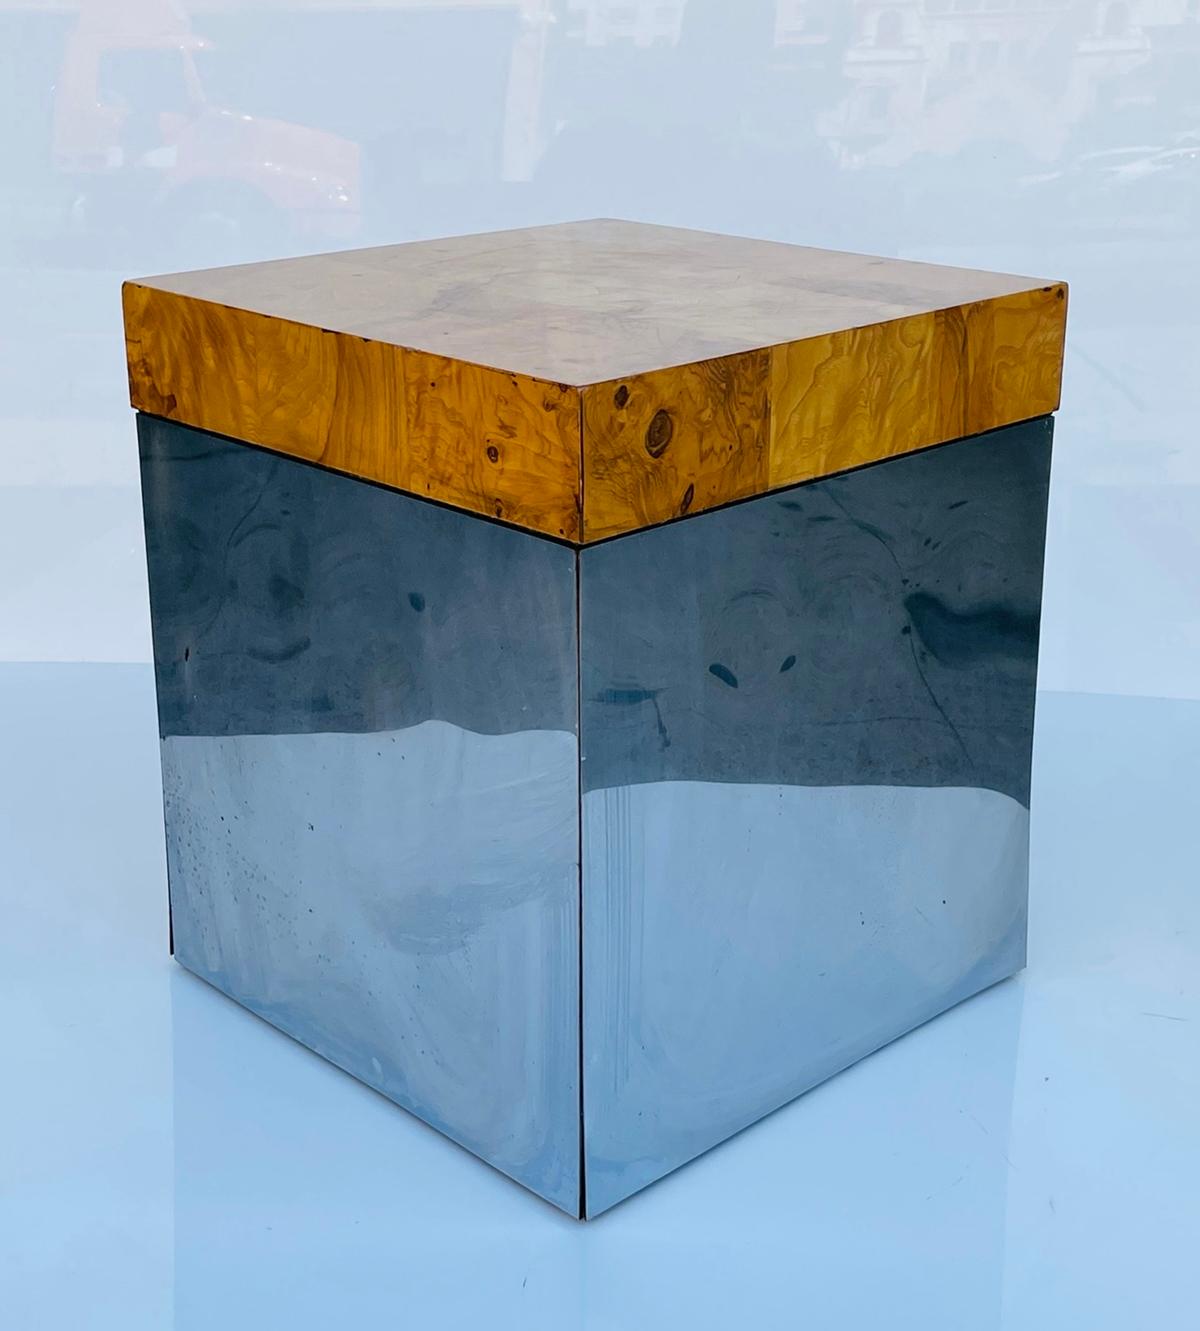 Beautiful side table designed by Milo Baughman and manufactured by Thayer Coggin.
The table has a burlwood top and the base is embossed in chrome.
The table retains the original Thayer Coggin label.
Measurements:
15 inches square x 17.25 inches